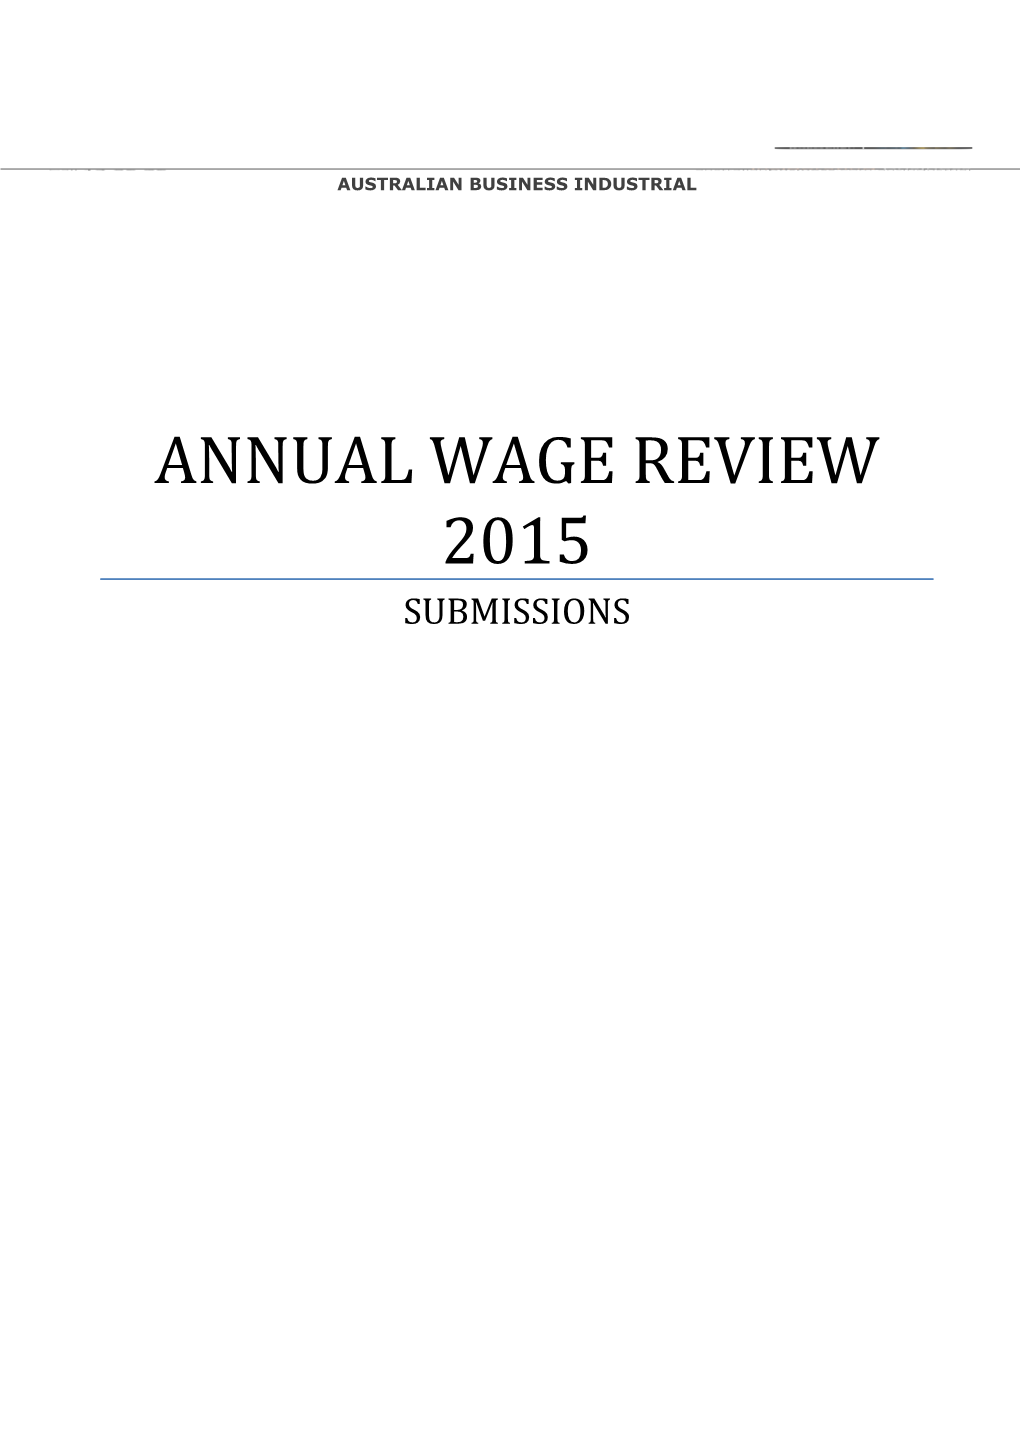 Annual Wage Review 2015